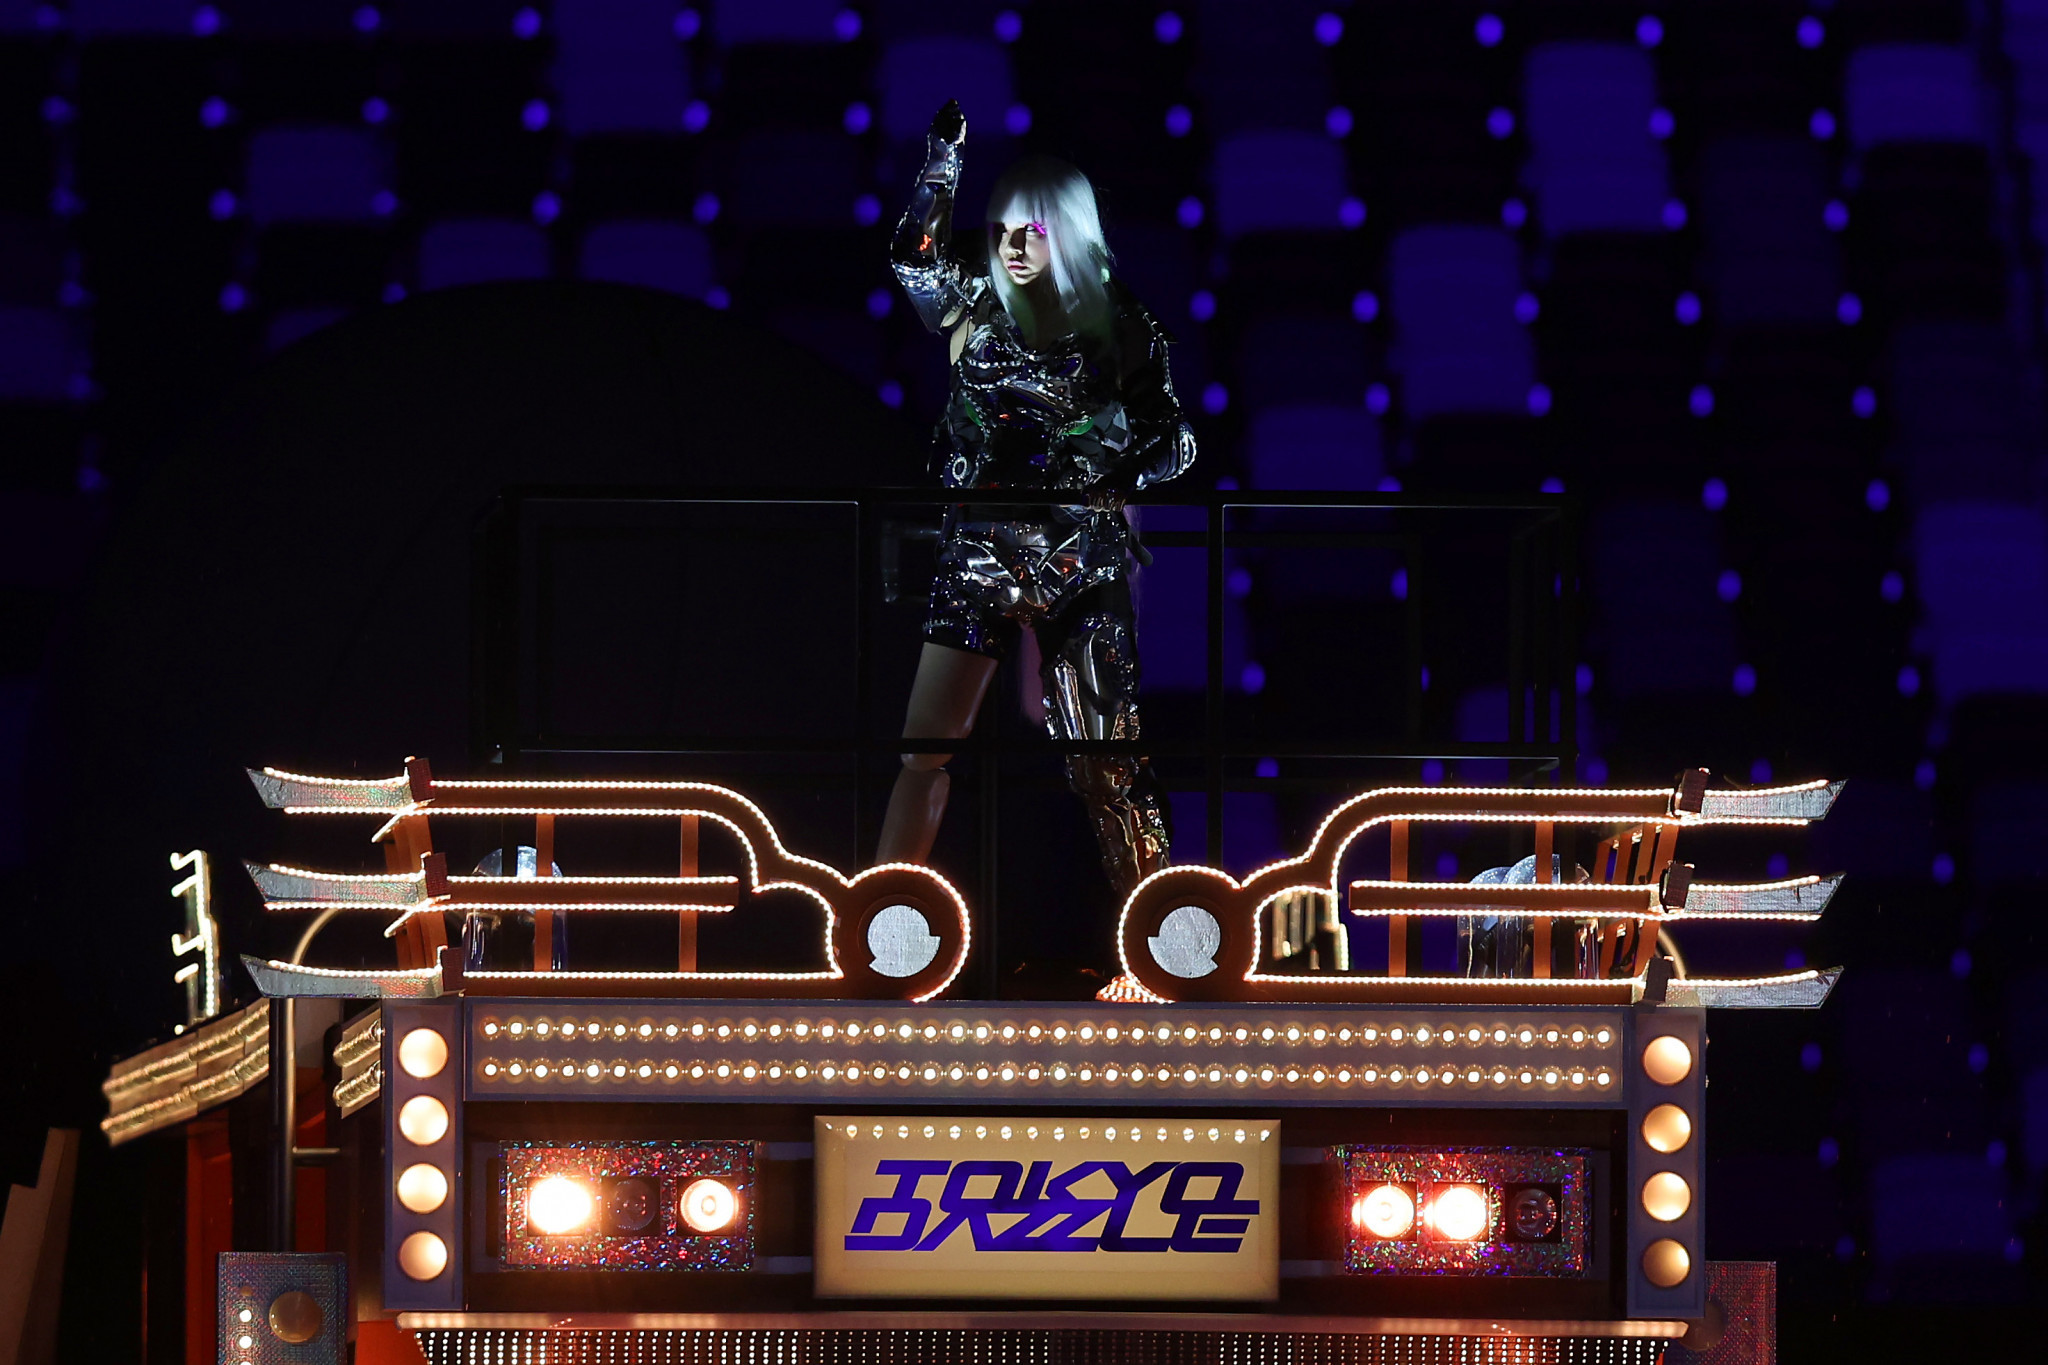 The Dazzling Truck featured as part of dance performances at the Tokyo 2020 Paralympics Opening Ceremony ©Getty Images